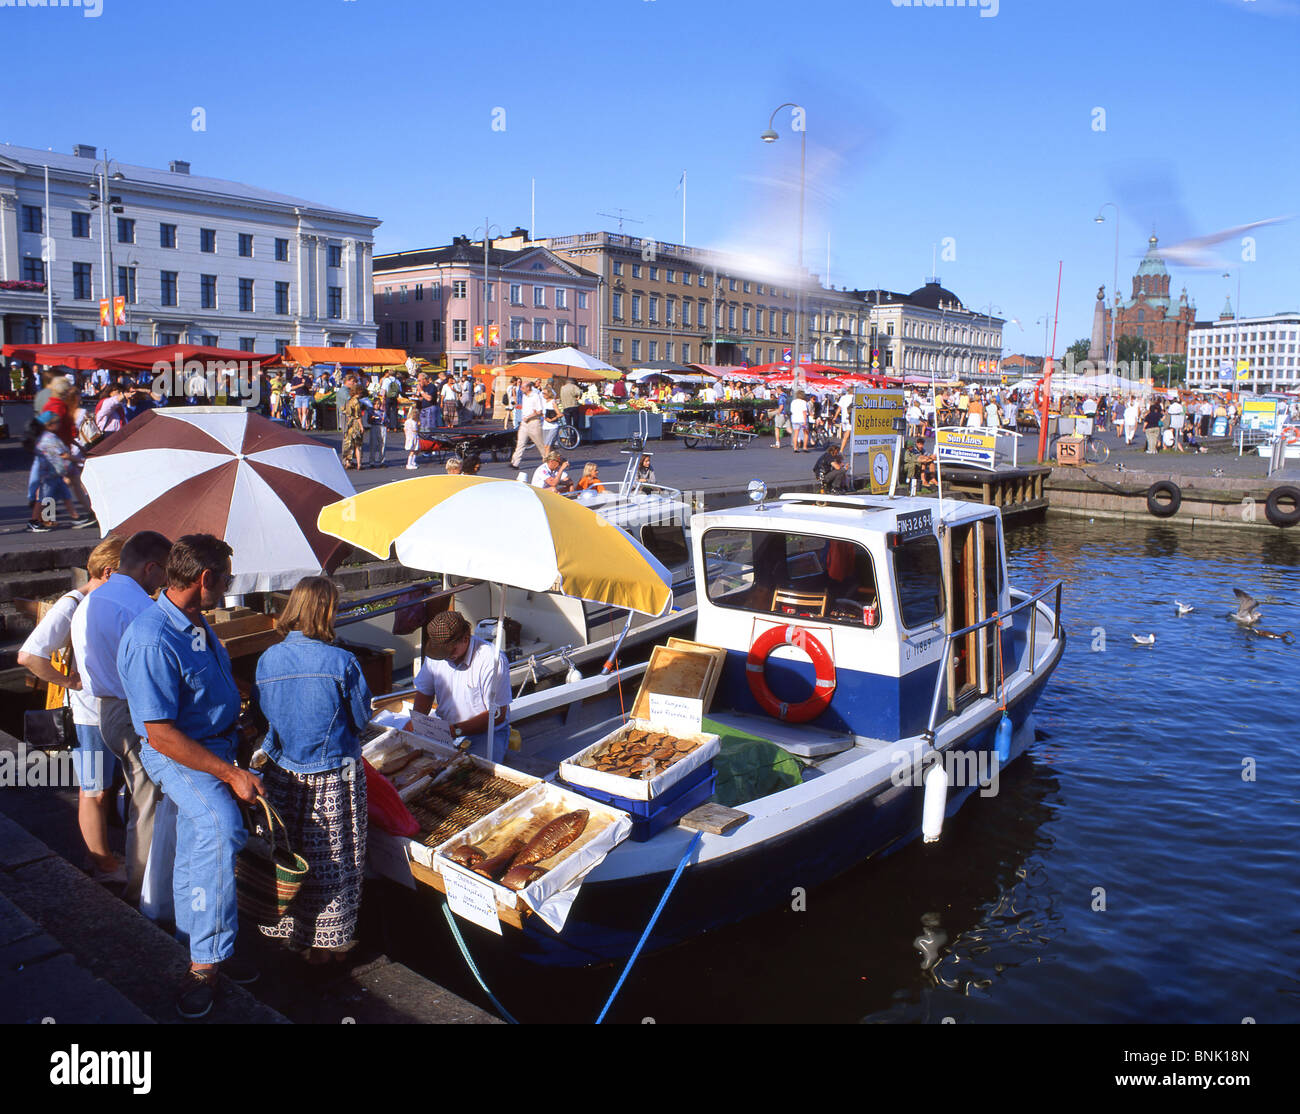 Selling fish from boat in harbour, Kauppatori Market Square, Helsinki, Uusimaa Region, Republic of Finland Stock Photo